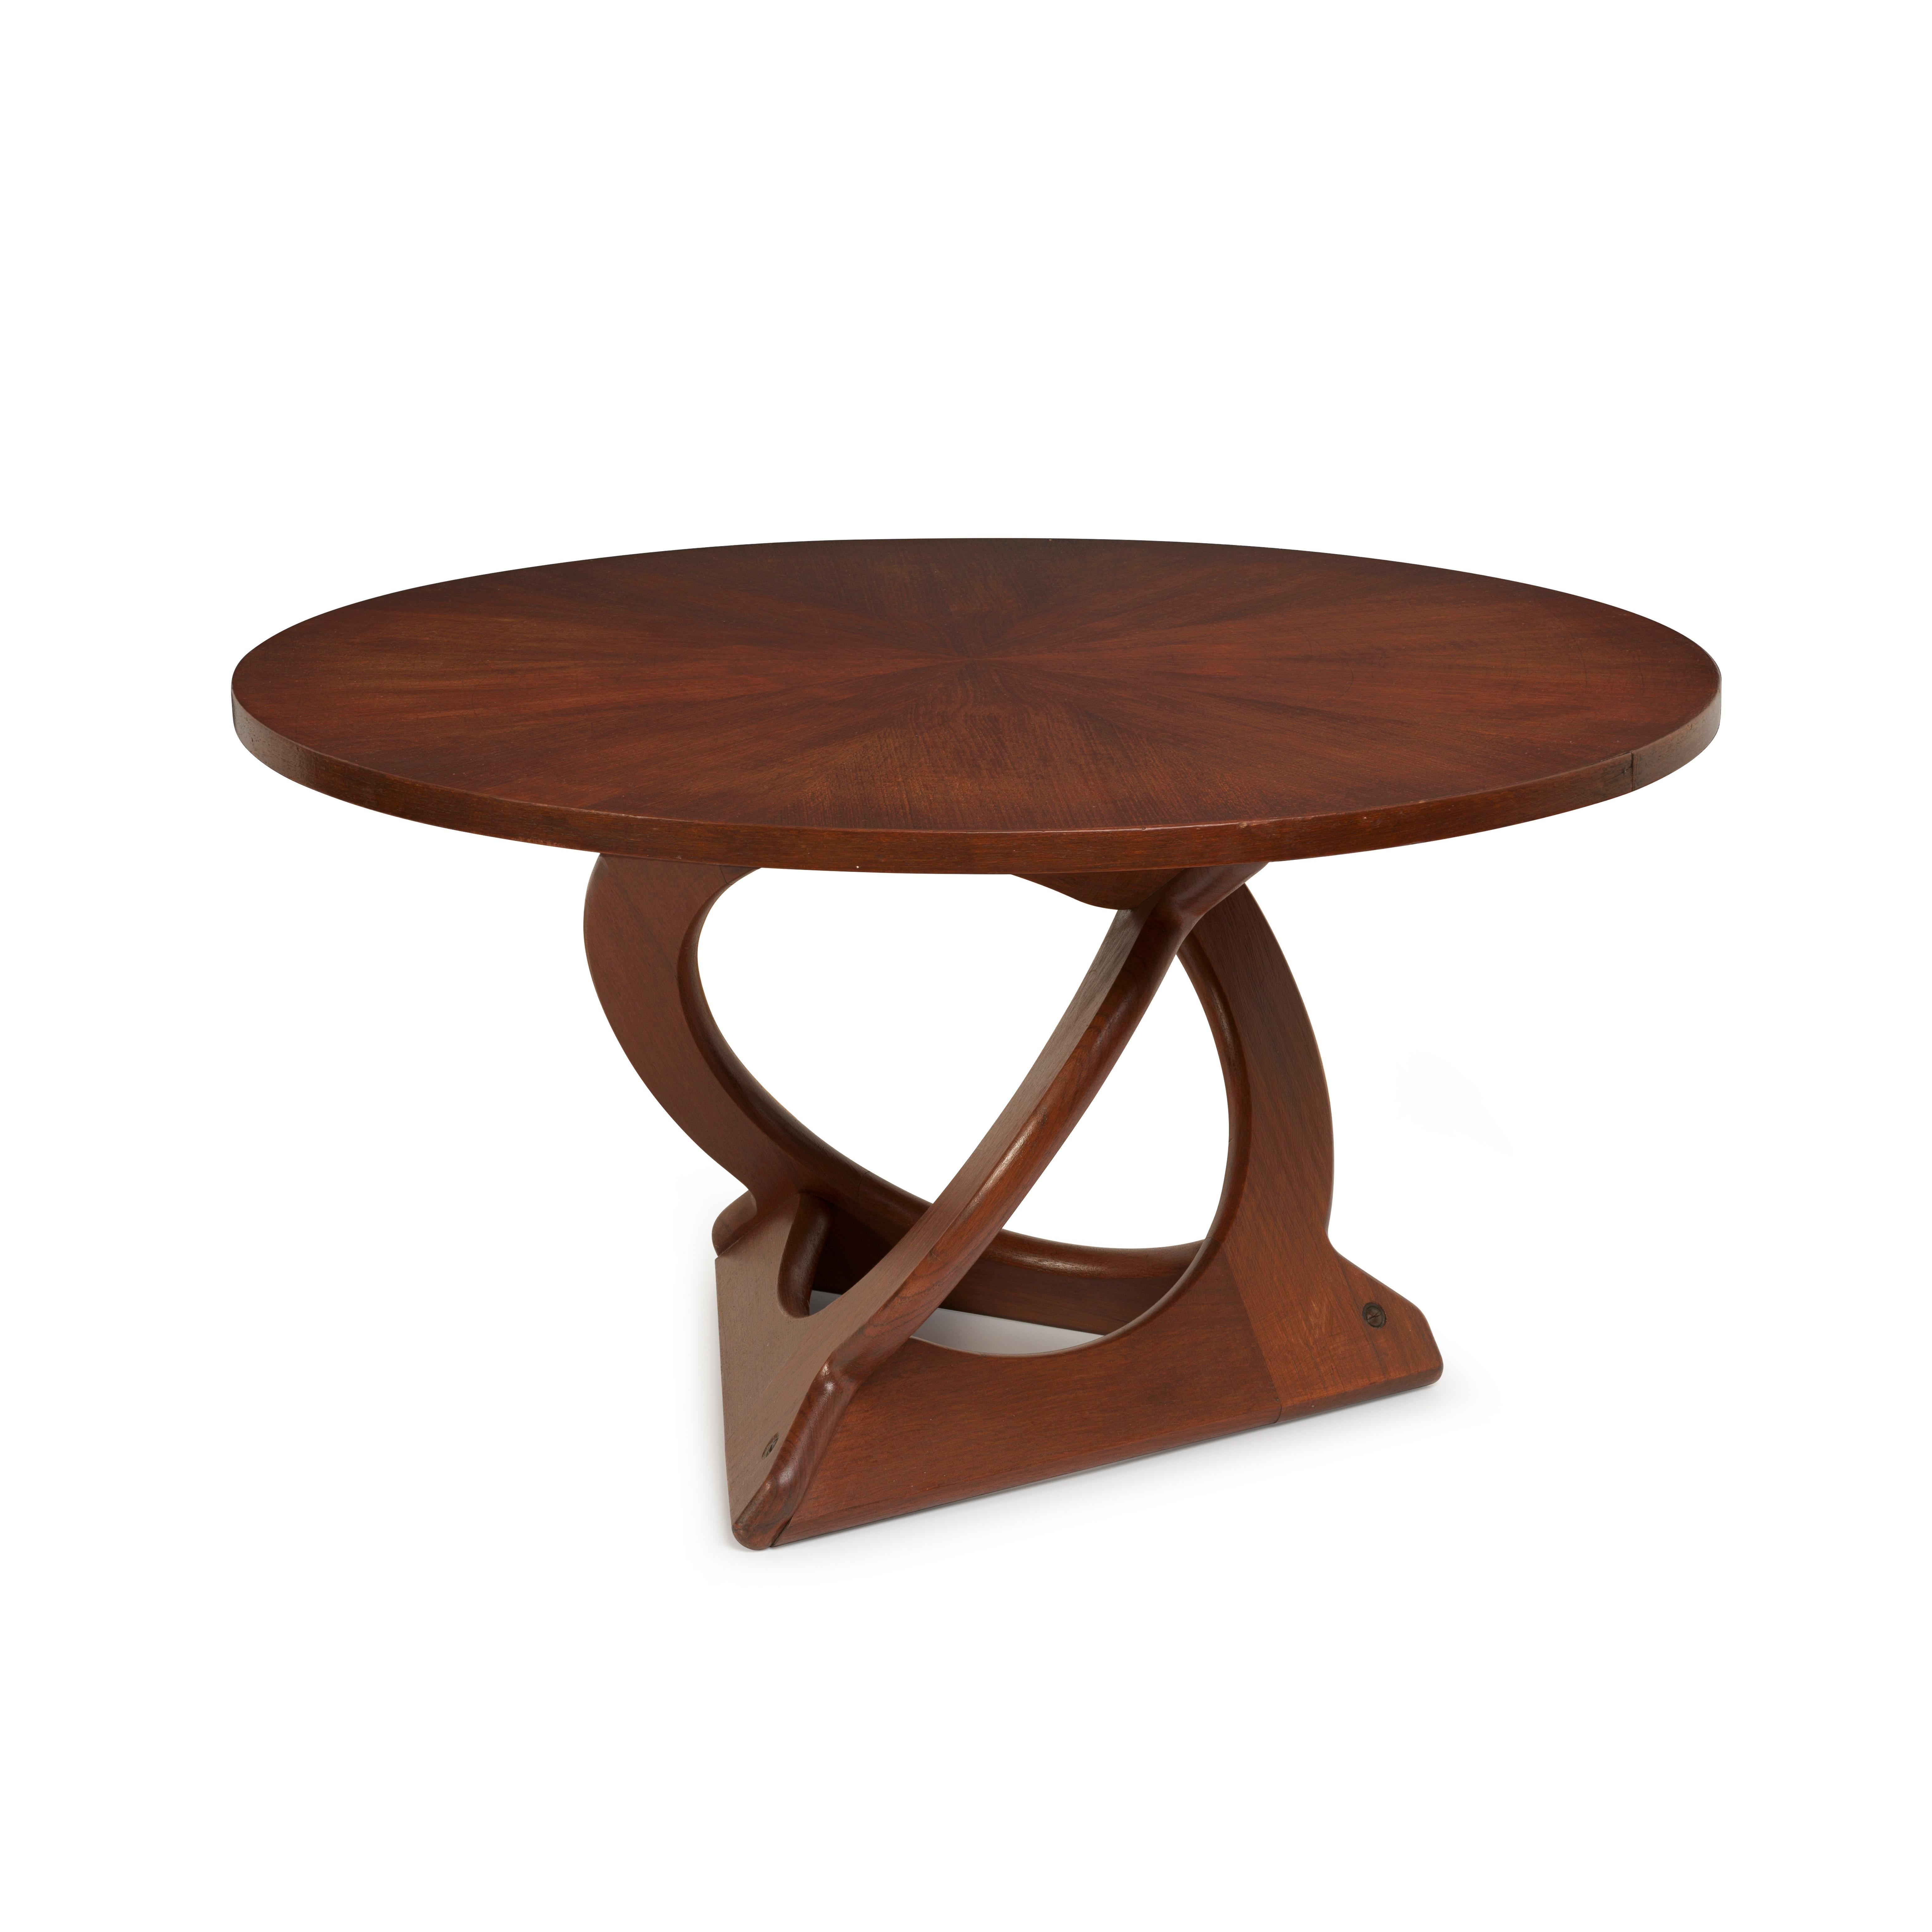 This Danish mid-century modern teak coffee table was designed by the Danish designer, Søren Georg Jensen and produced by Kubus. The design is sculpturally distinctive with intertwining legs that interact with each other in an artistic way,